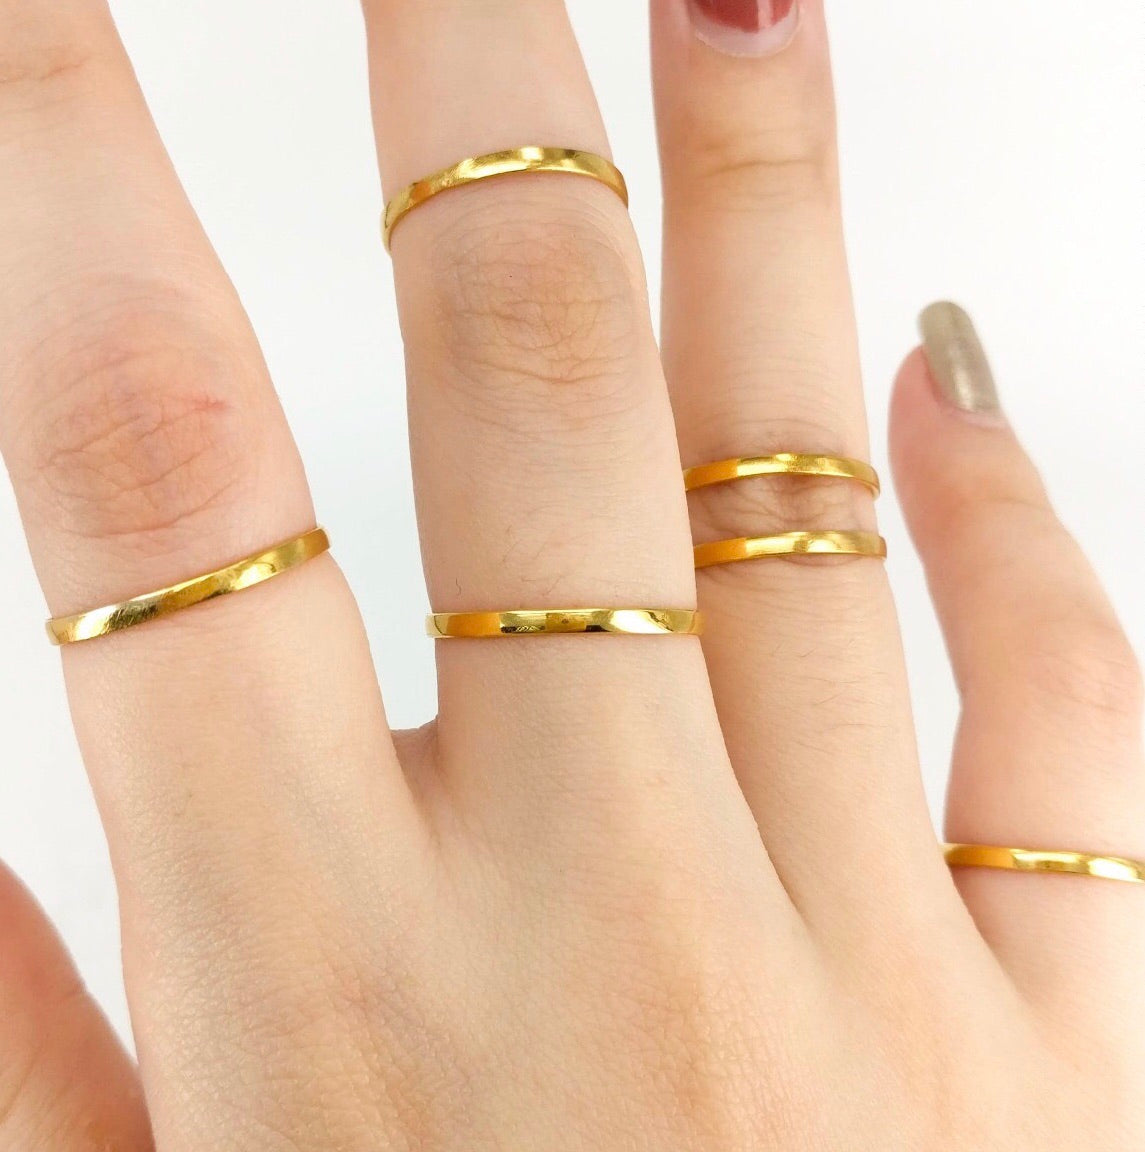 CLAIRE Super Skinny Stacking Ring in 18K Gold, Lots of Sizes 4-13